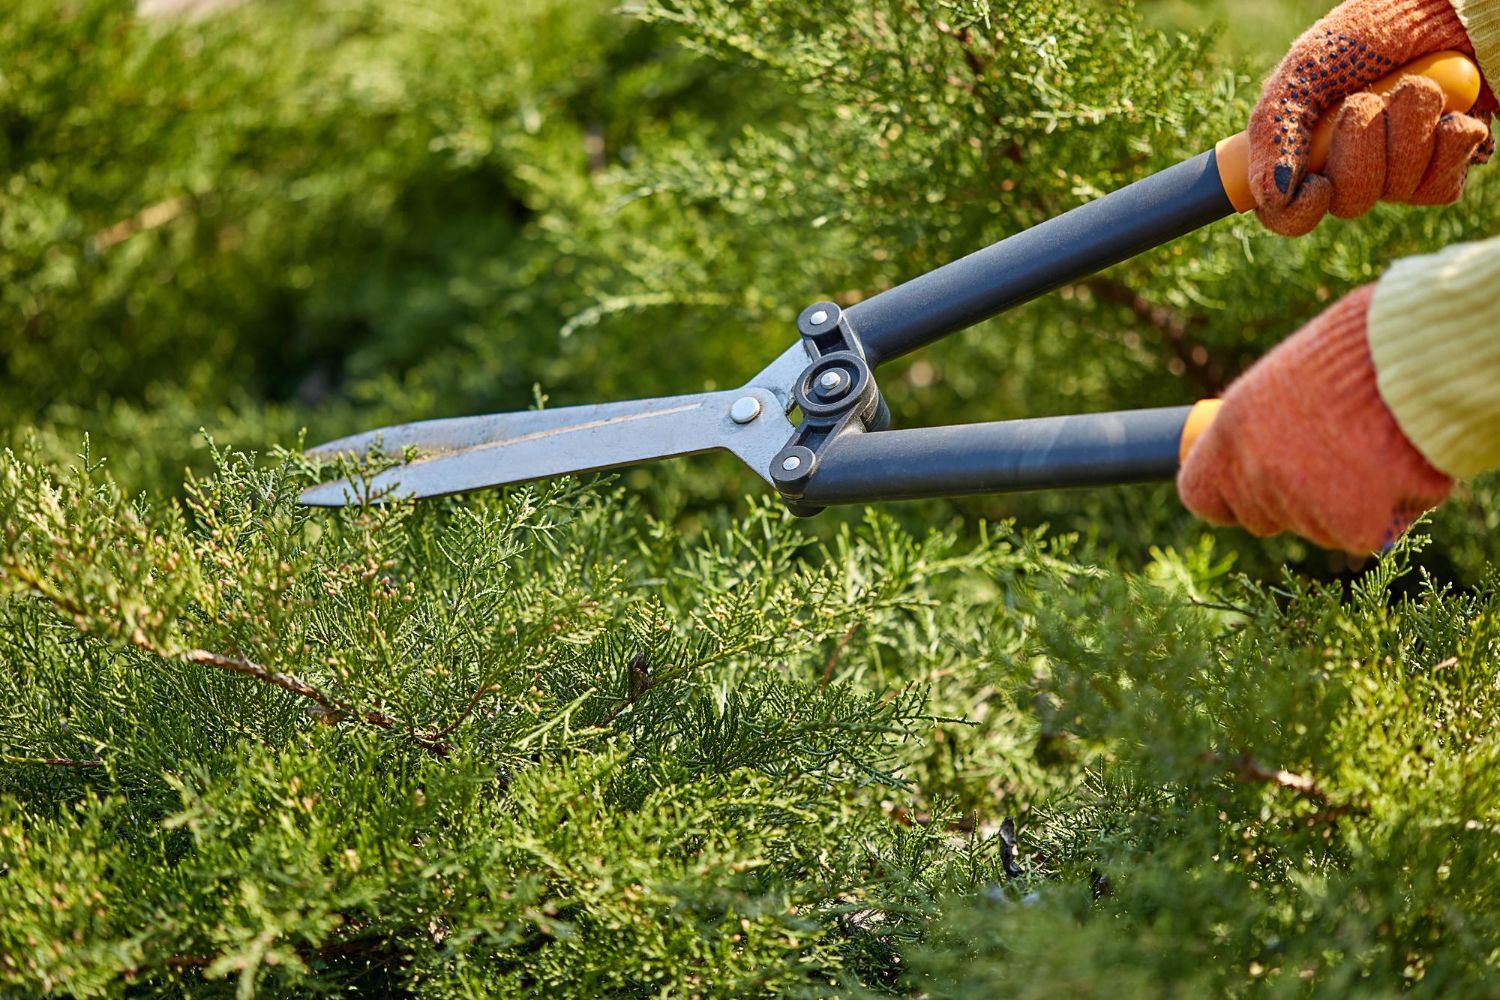 A person is cutting a bush with a pair of scissors.